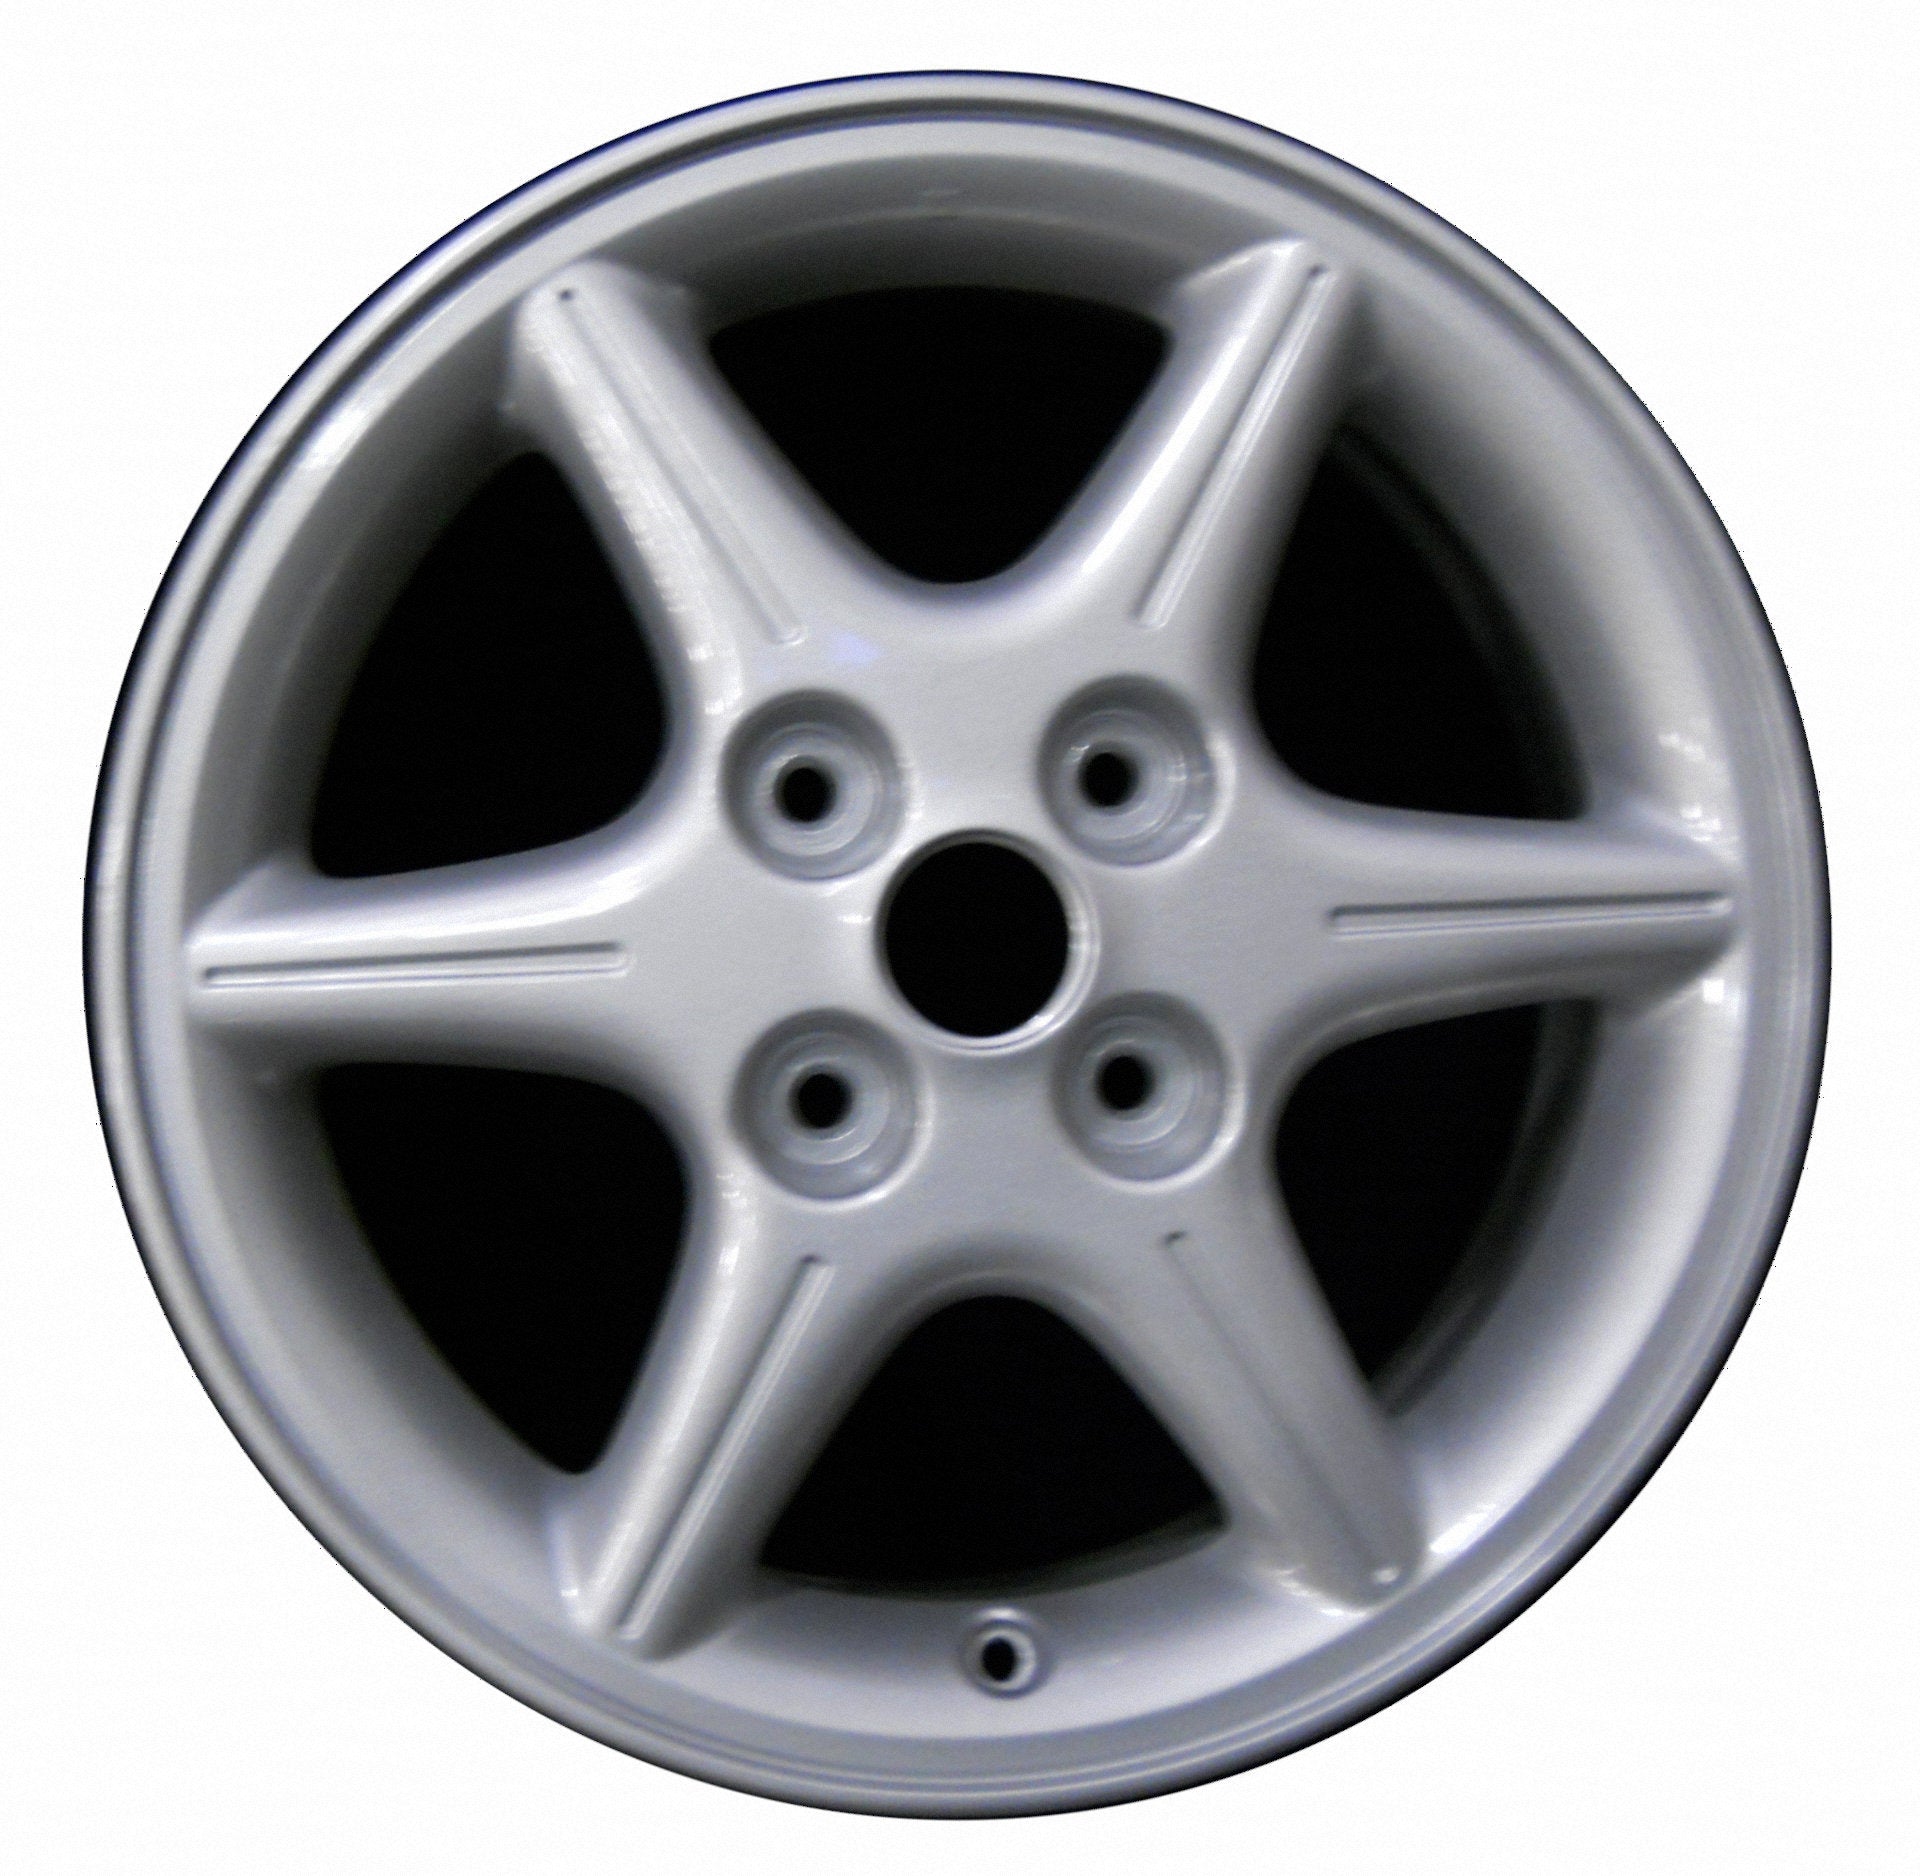 Nissan Altima  2000, 2001, 2002, 2003 Factory OEM Car Wheel Size 16x6 Alloy WAO.62383.PS02.FF